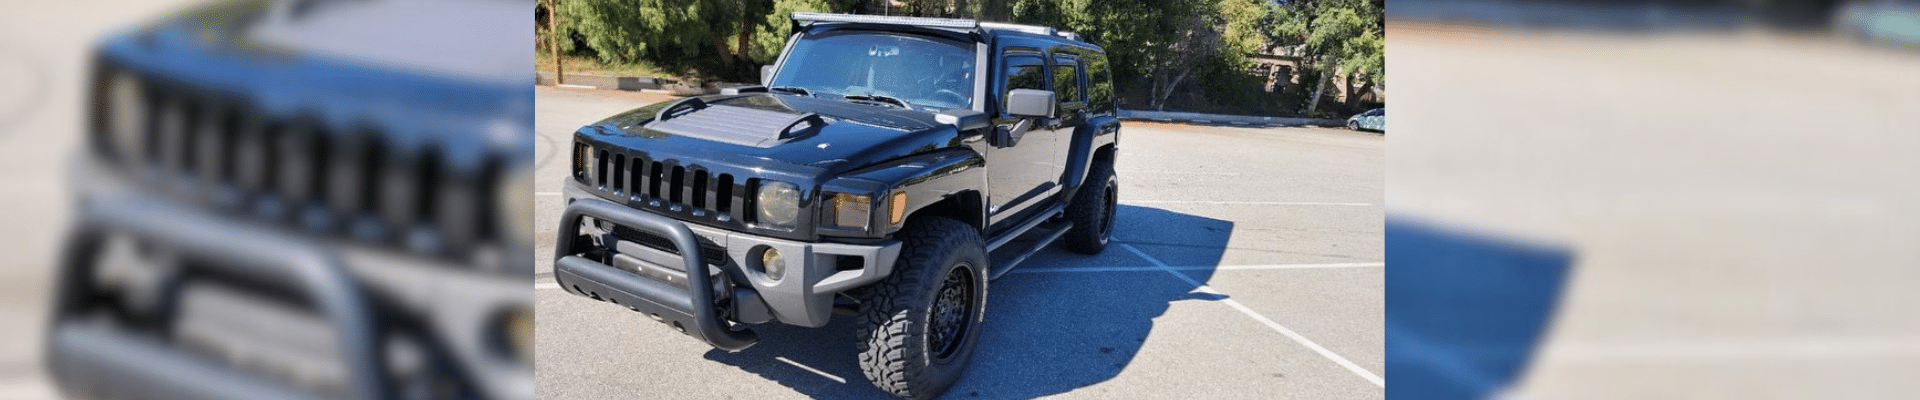 Hummer H3 gallery 3